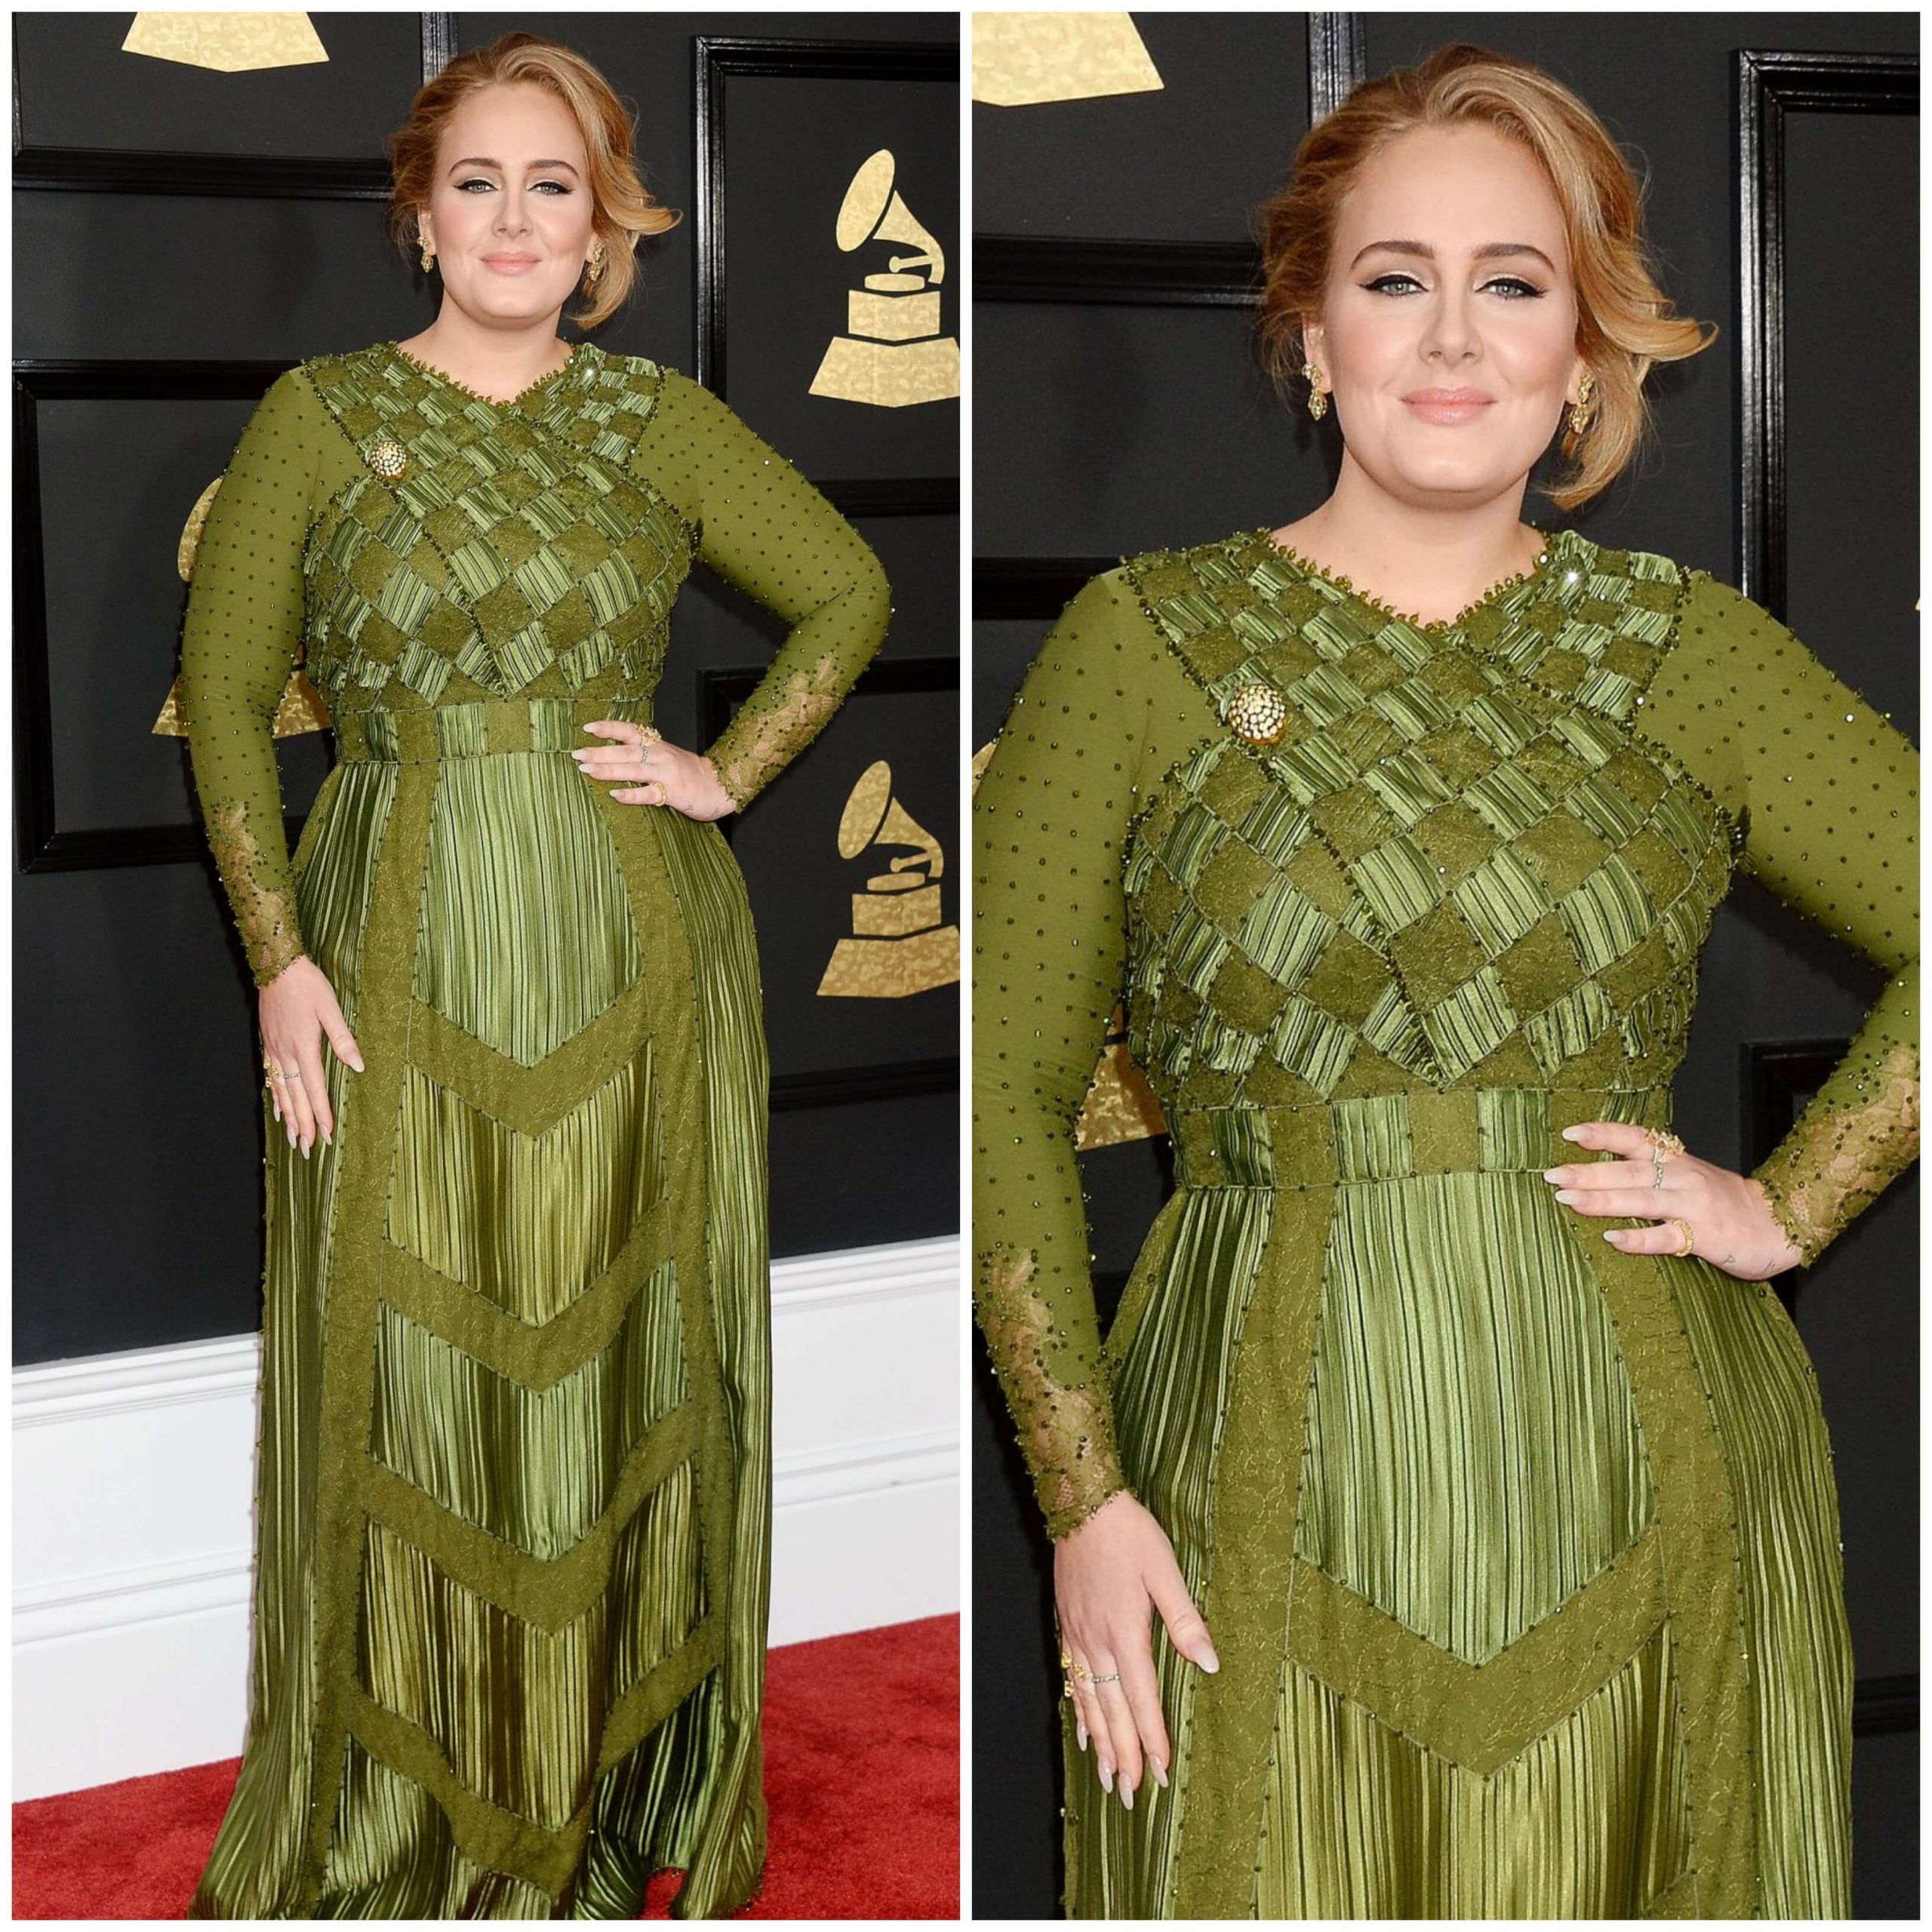 Total 82+ imagen adele grammy outfit - Abzlocal.mx